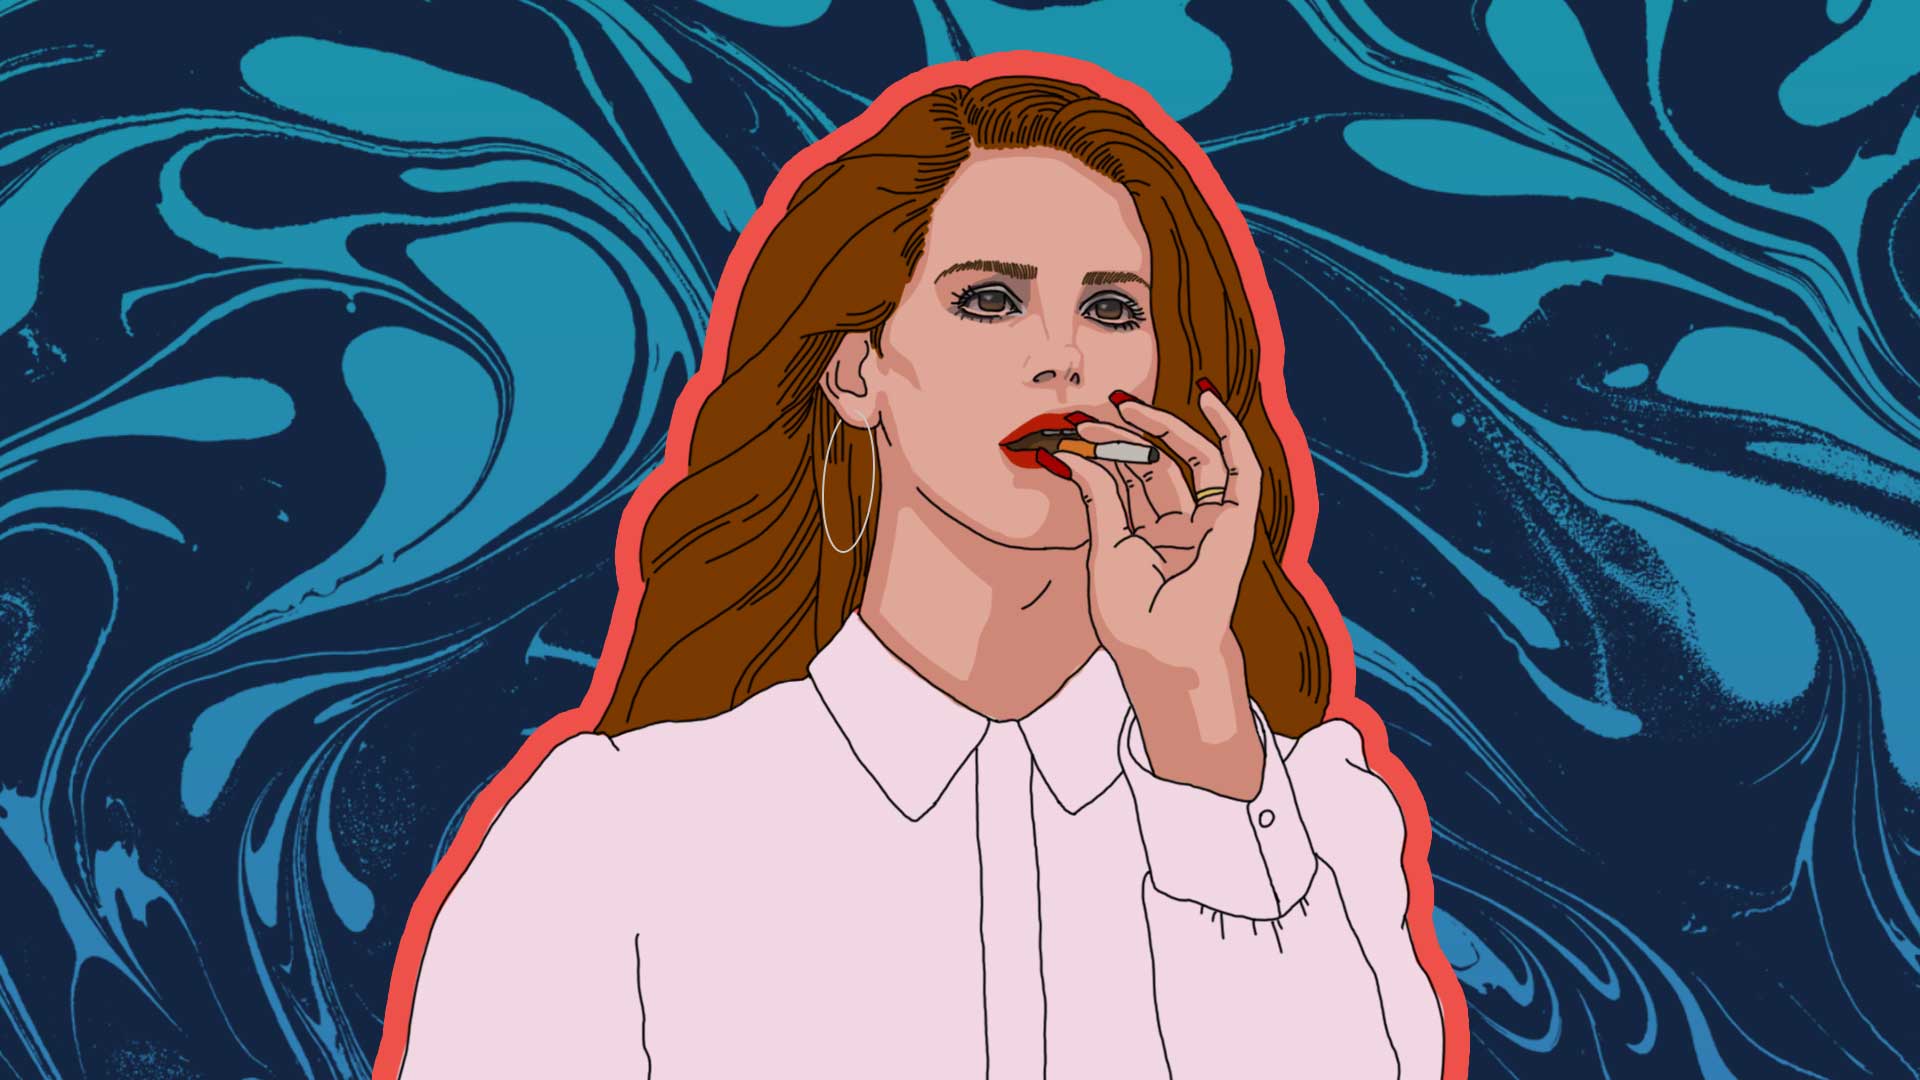 Embracing the Ephemeral: Lana Del Rey's Ode to Growing Up